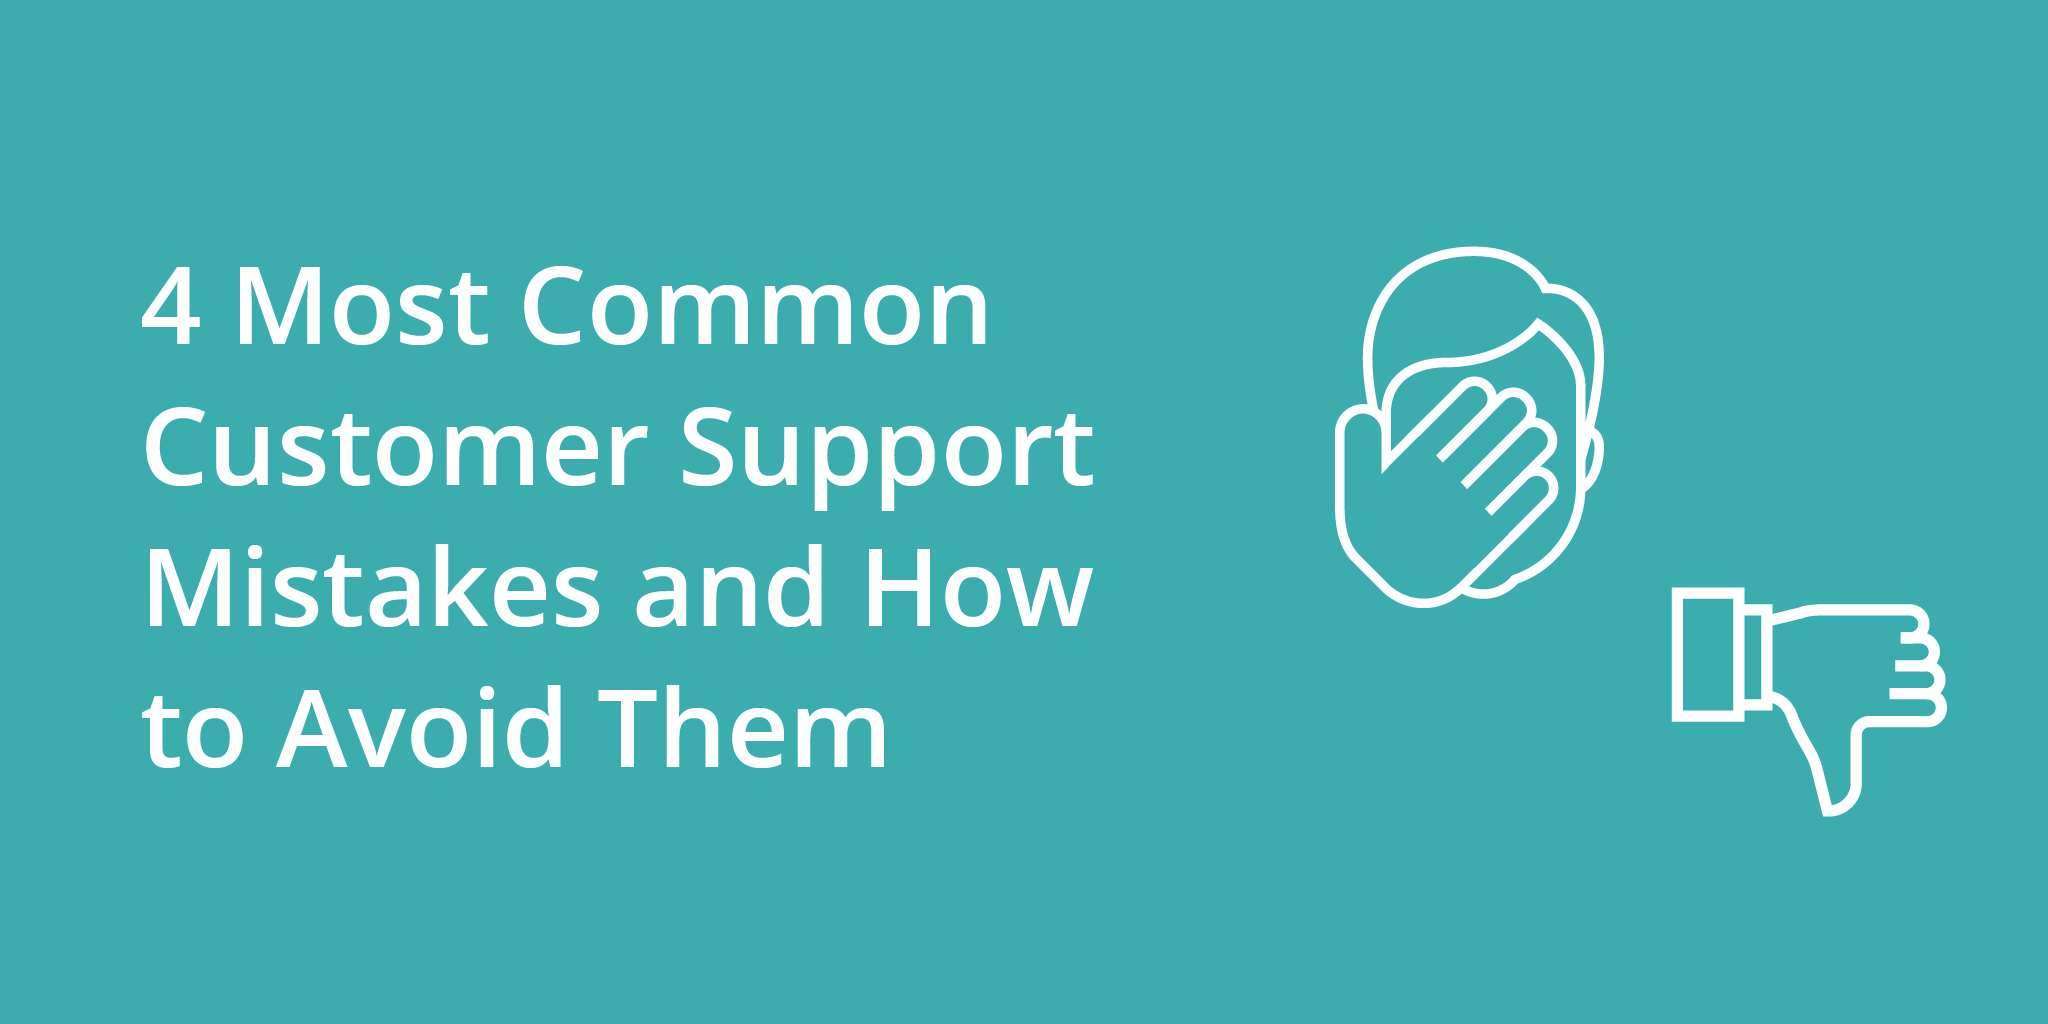 4 Most Common Customer Support Mistakes and How to Avoid Them | Telephones for business